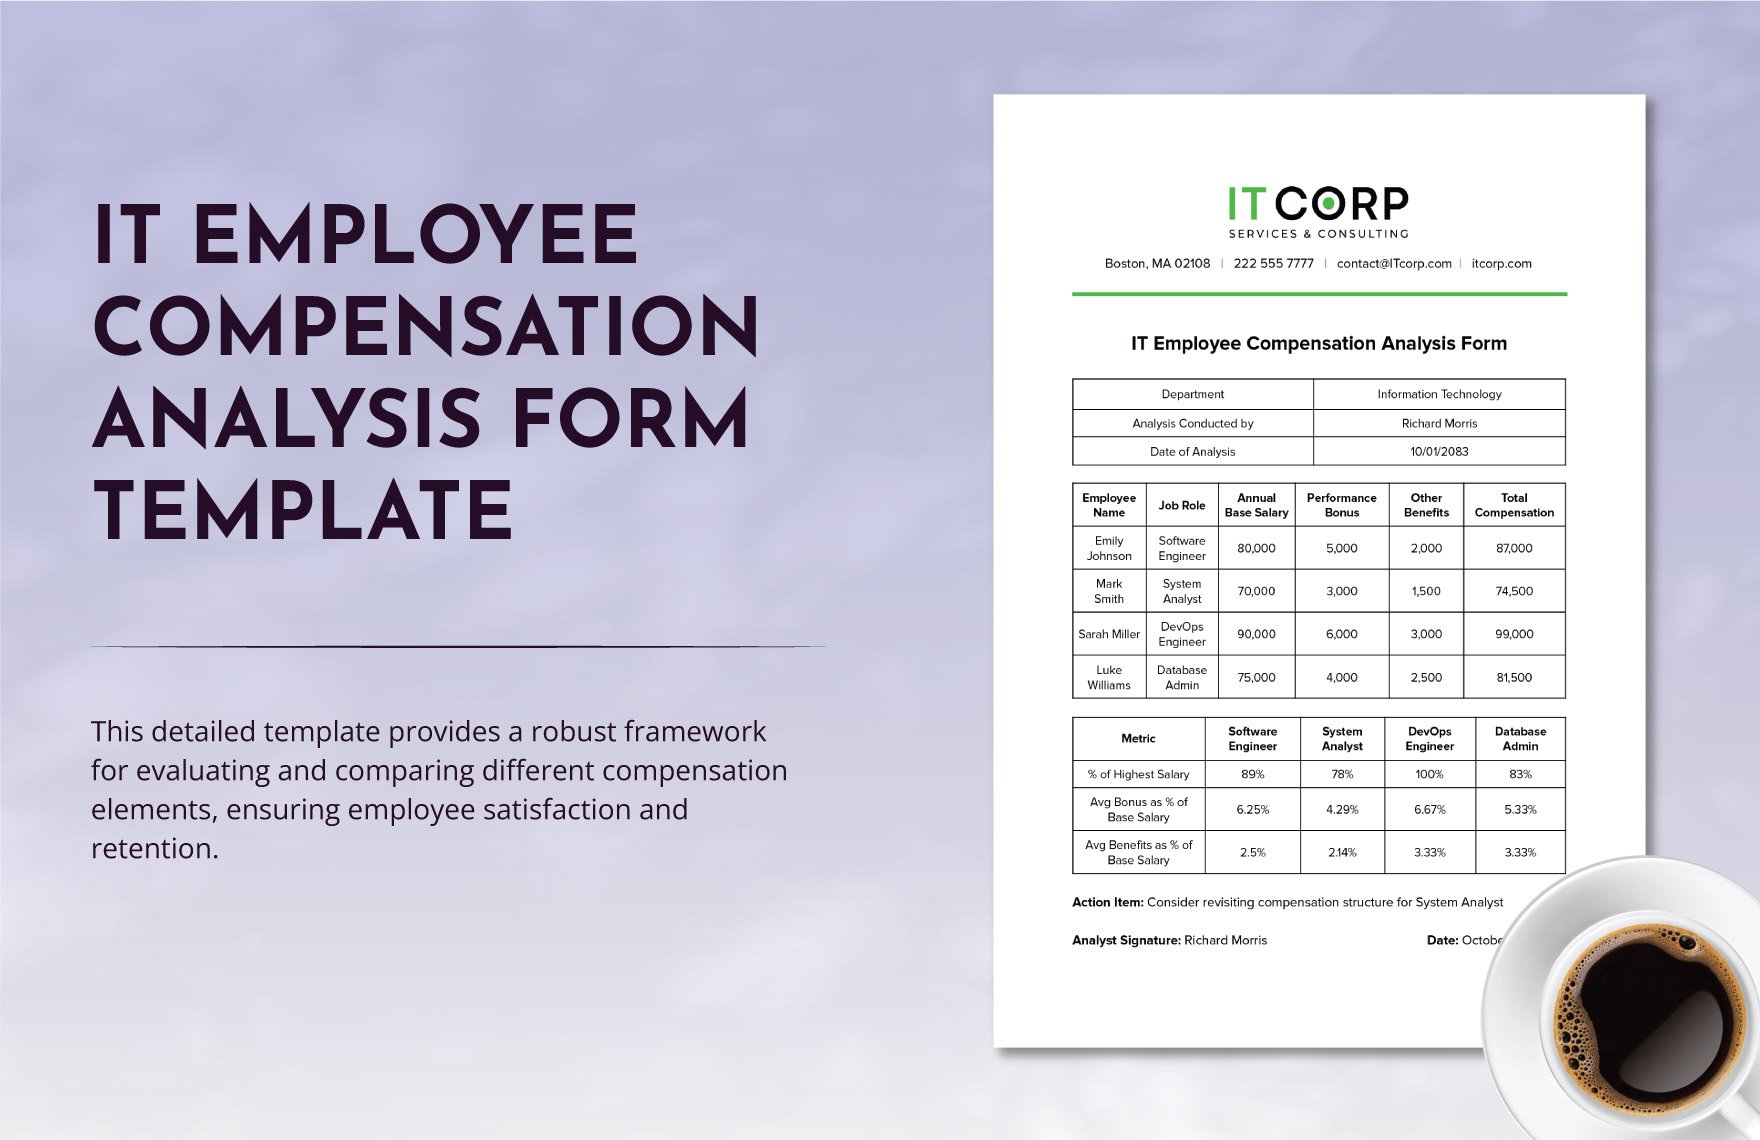 IT Employee Compensation Analysis Form Template in Word, Google Docs, PDF